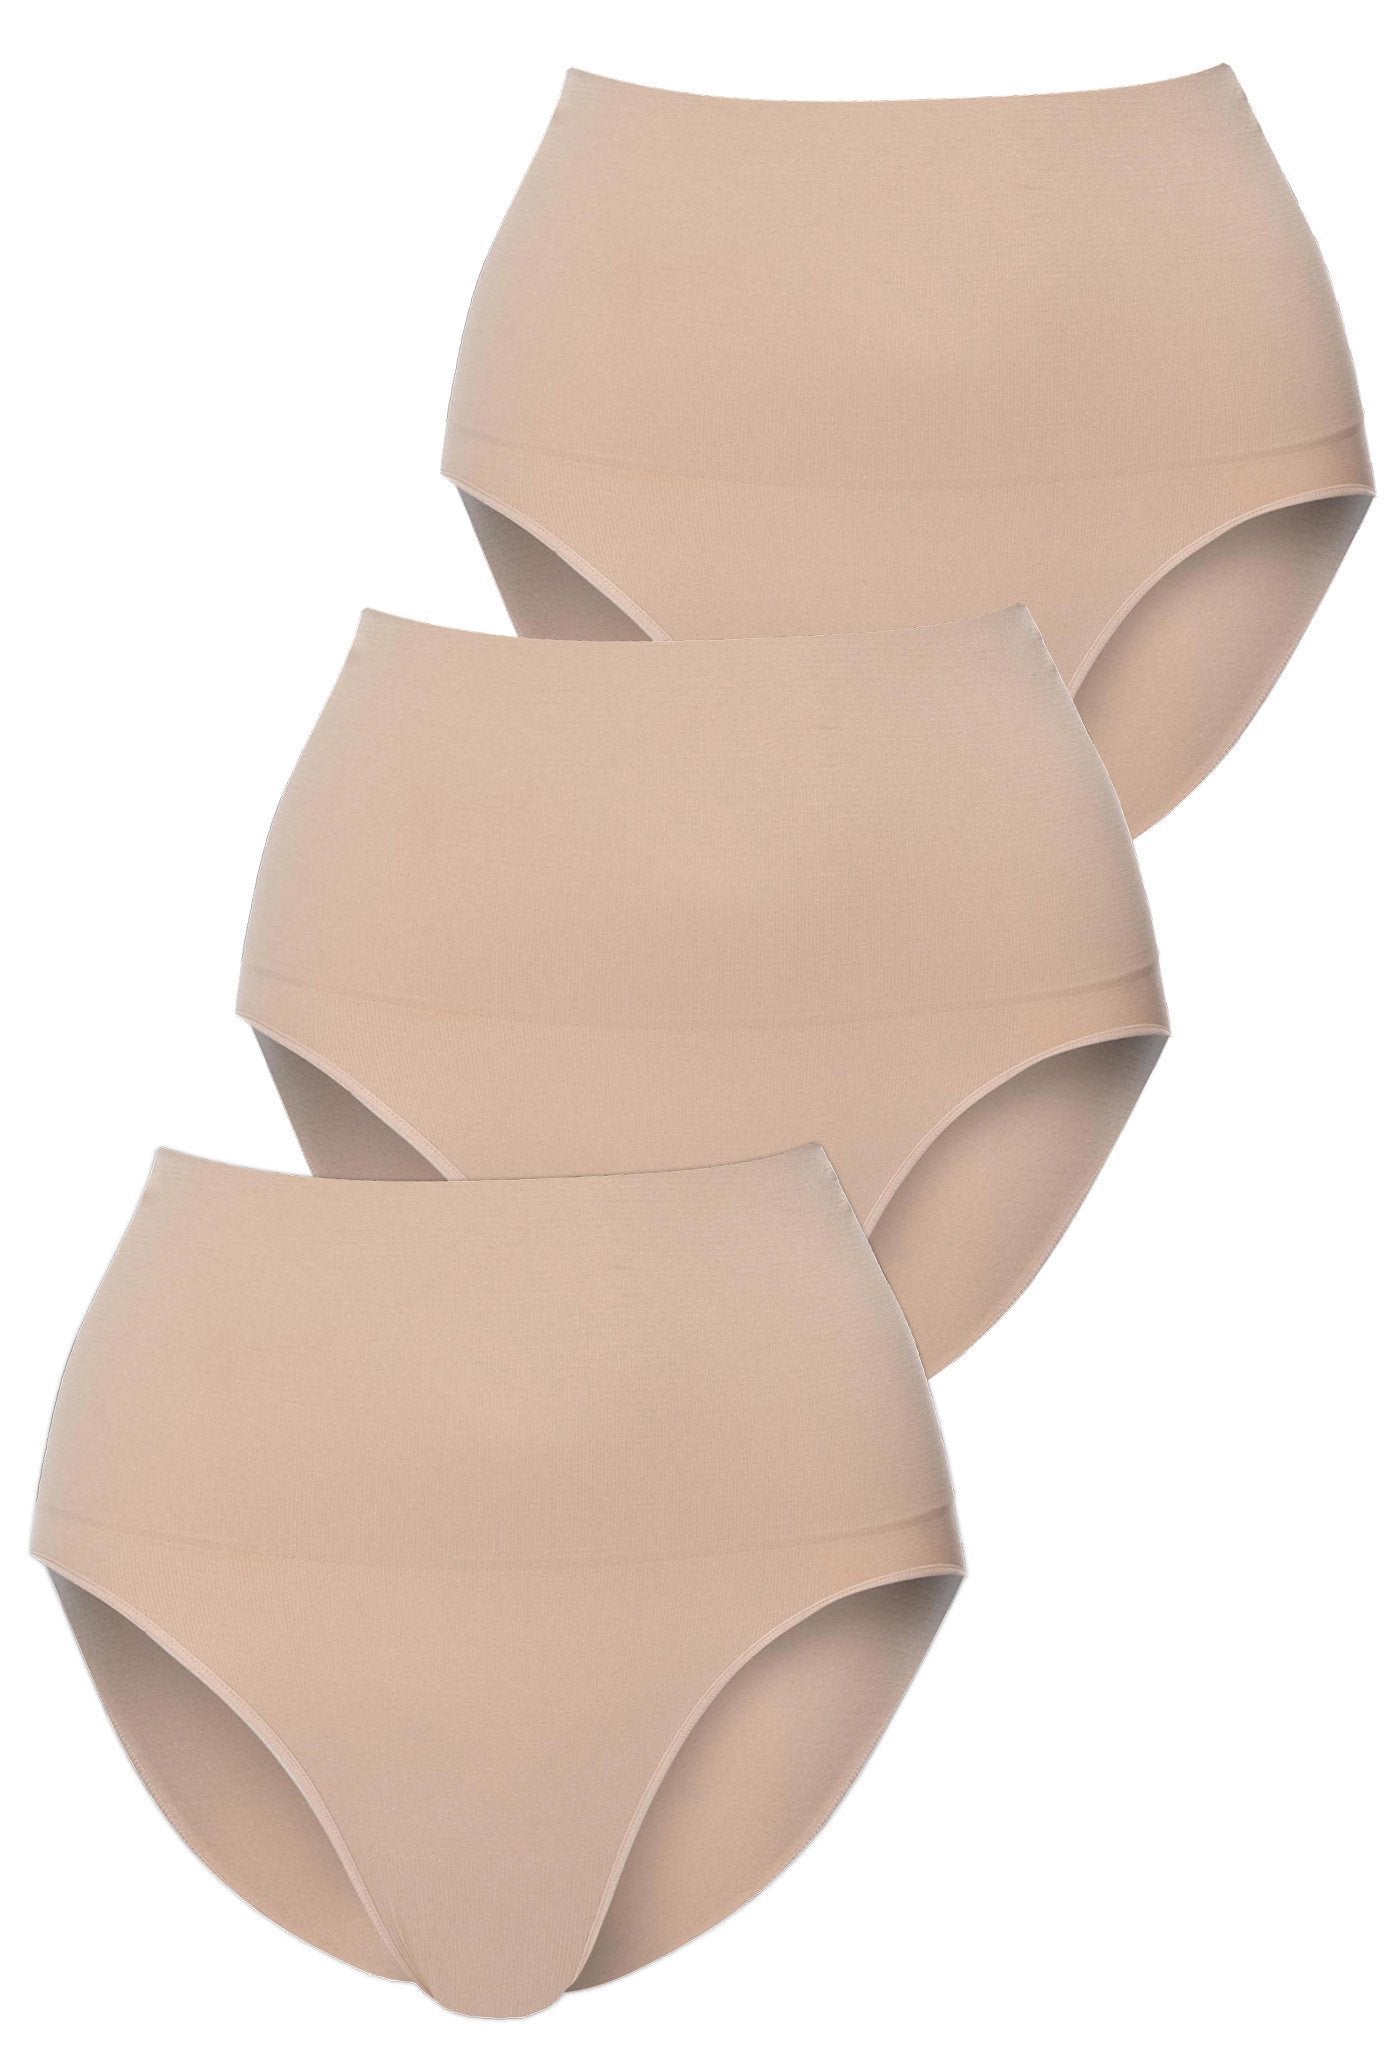 Low Back Shaping Briefs - 3 Pack, Shapewear